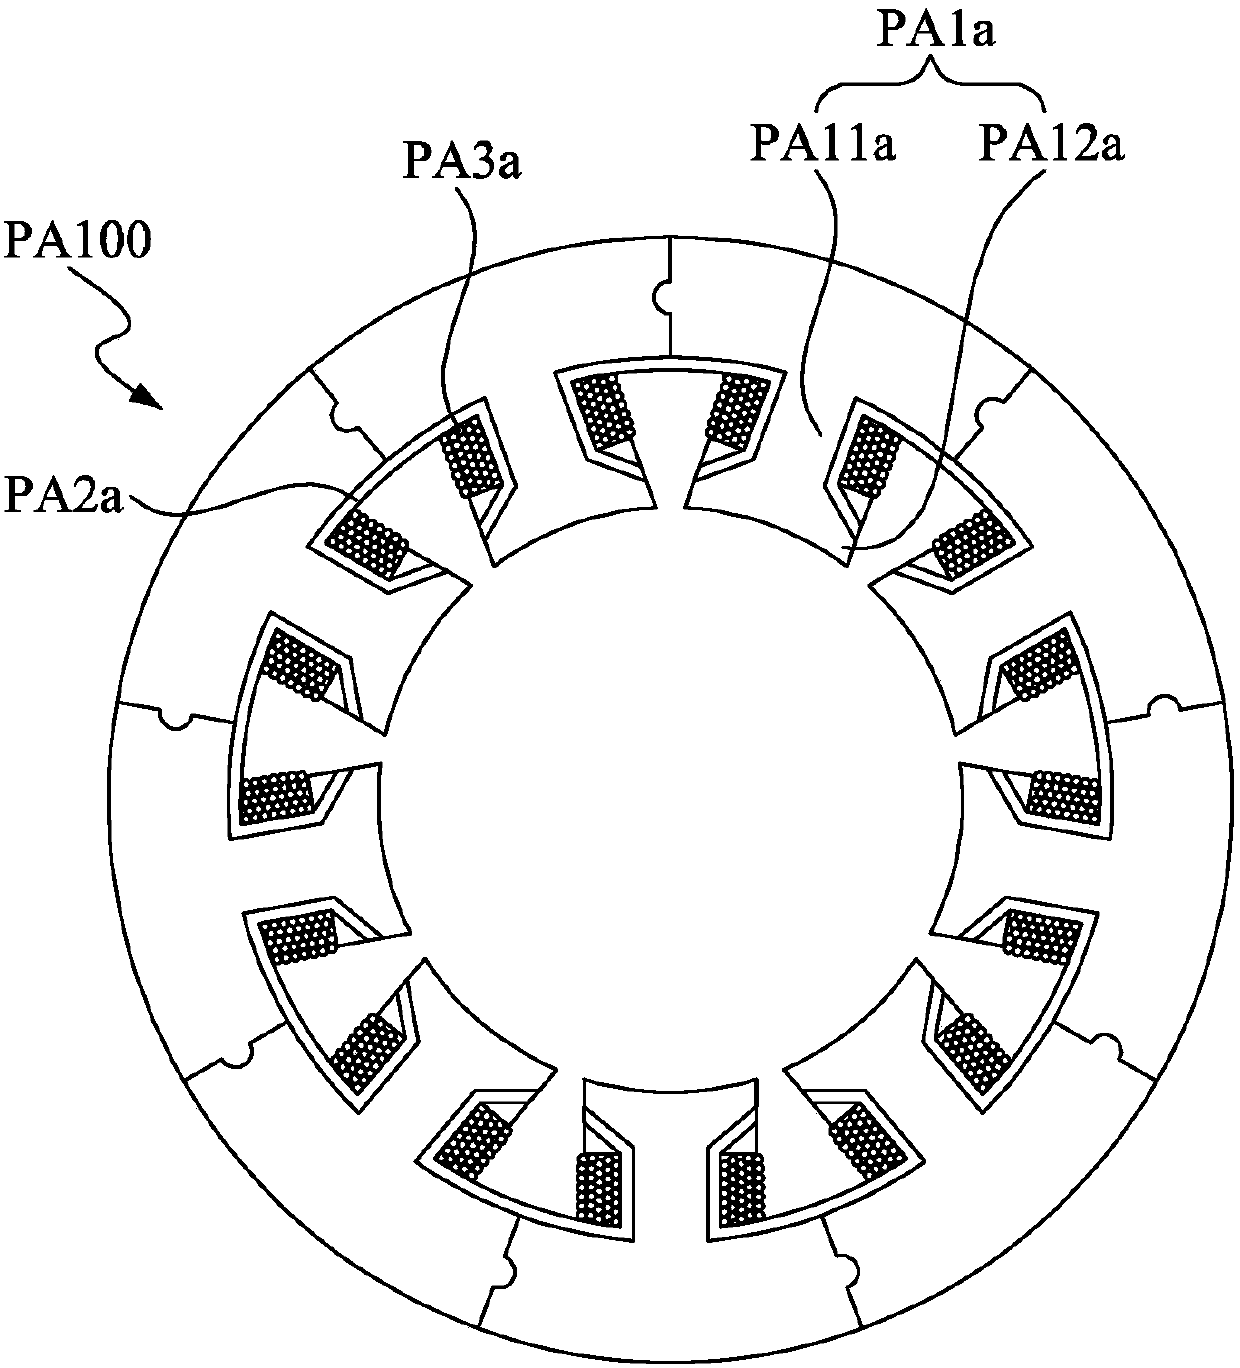 Stator winding insulation structure